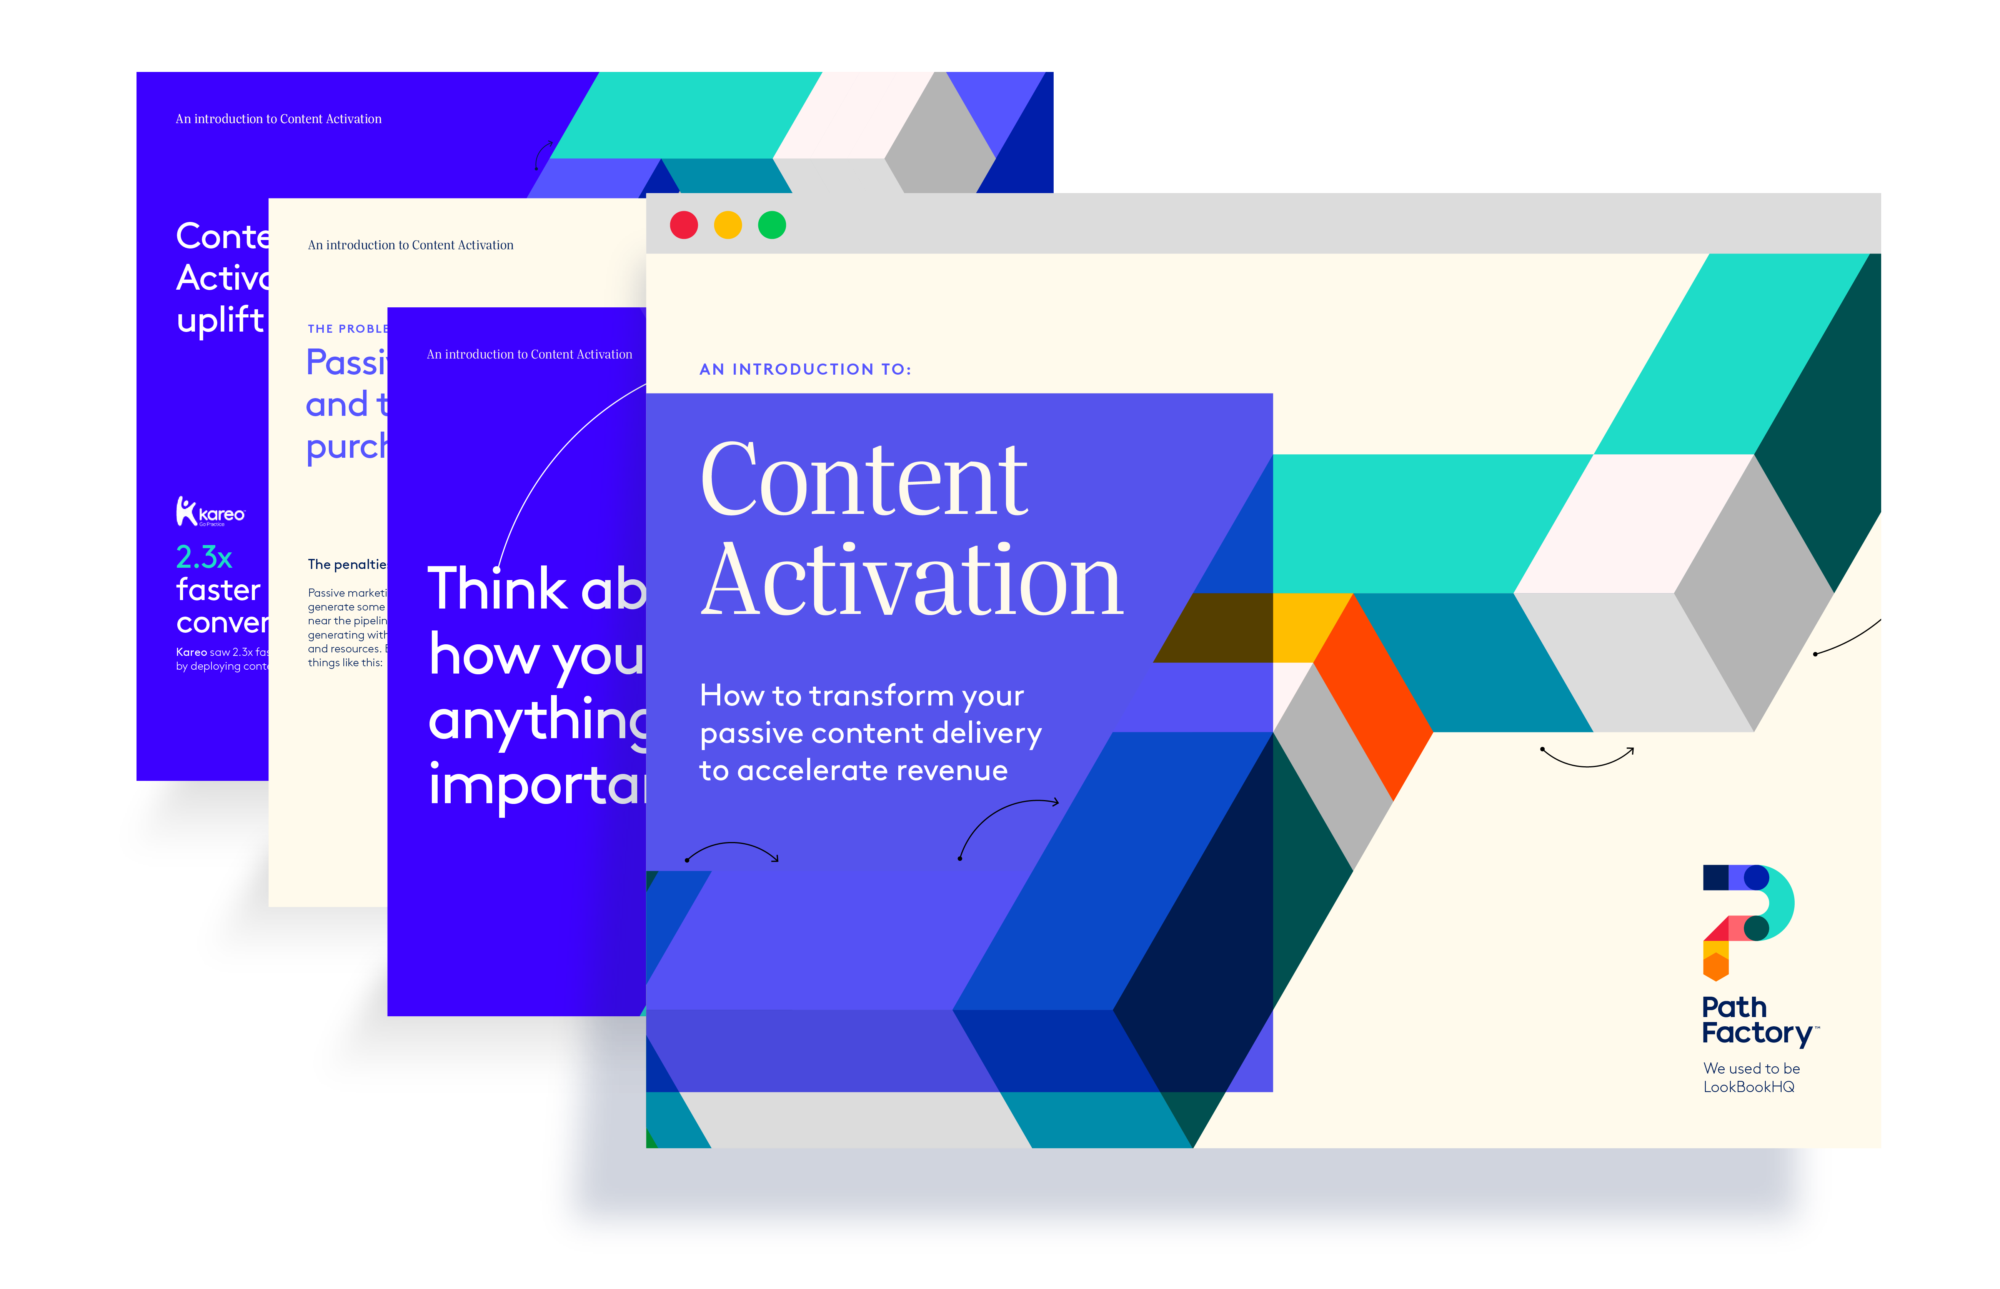 Content Activation.  How to transform your passive content delivery to accelerate revenue